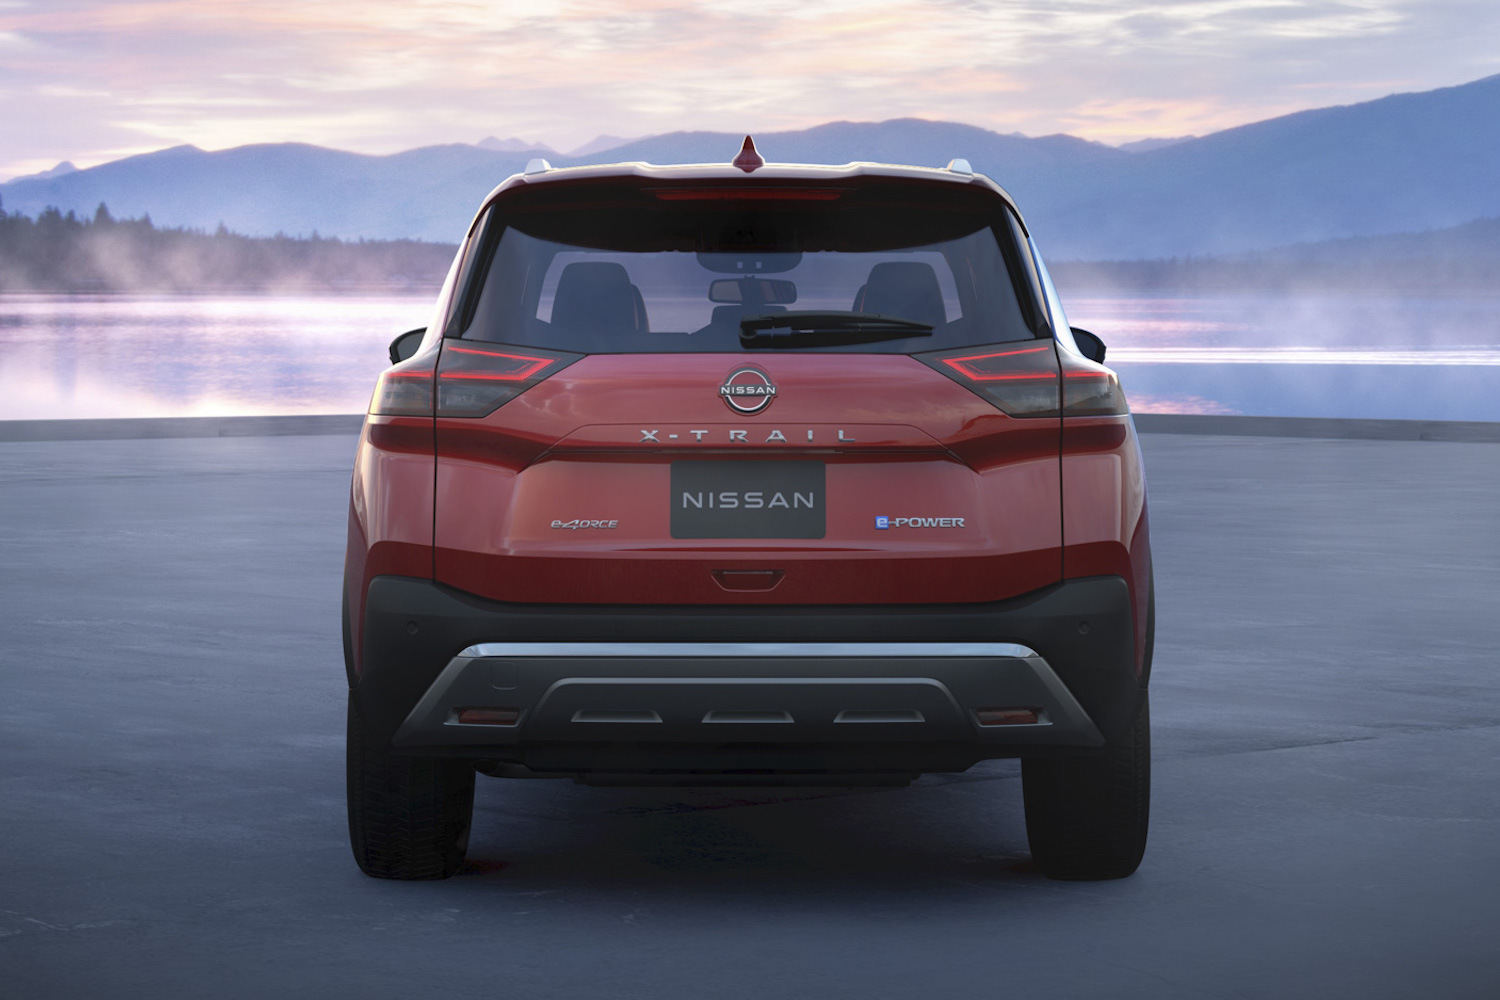 Nissan shows off new electrified X-Trail